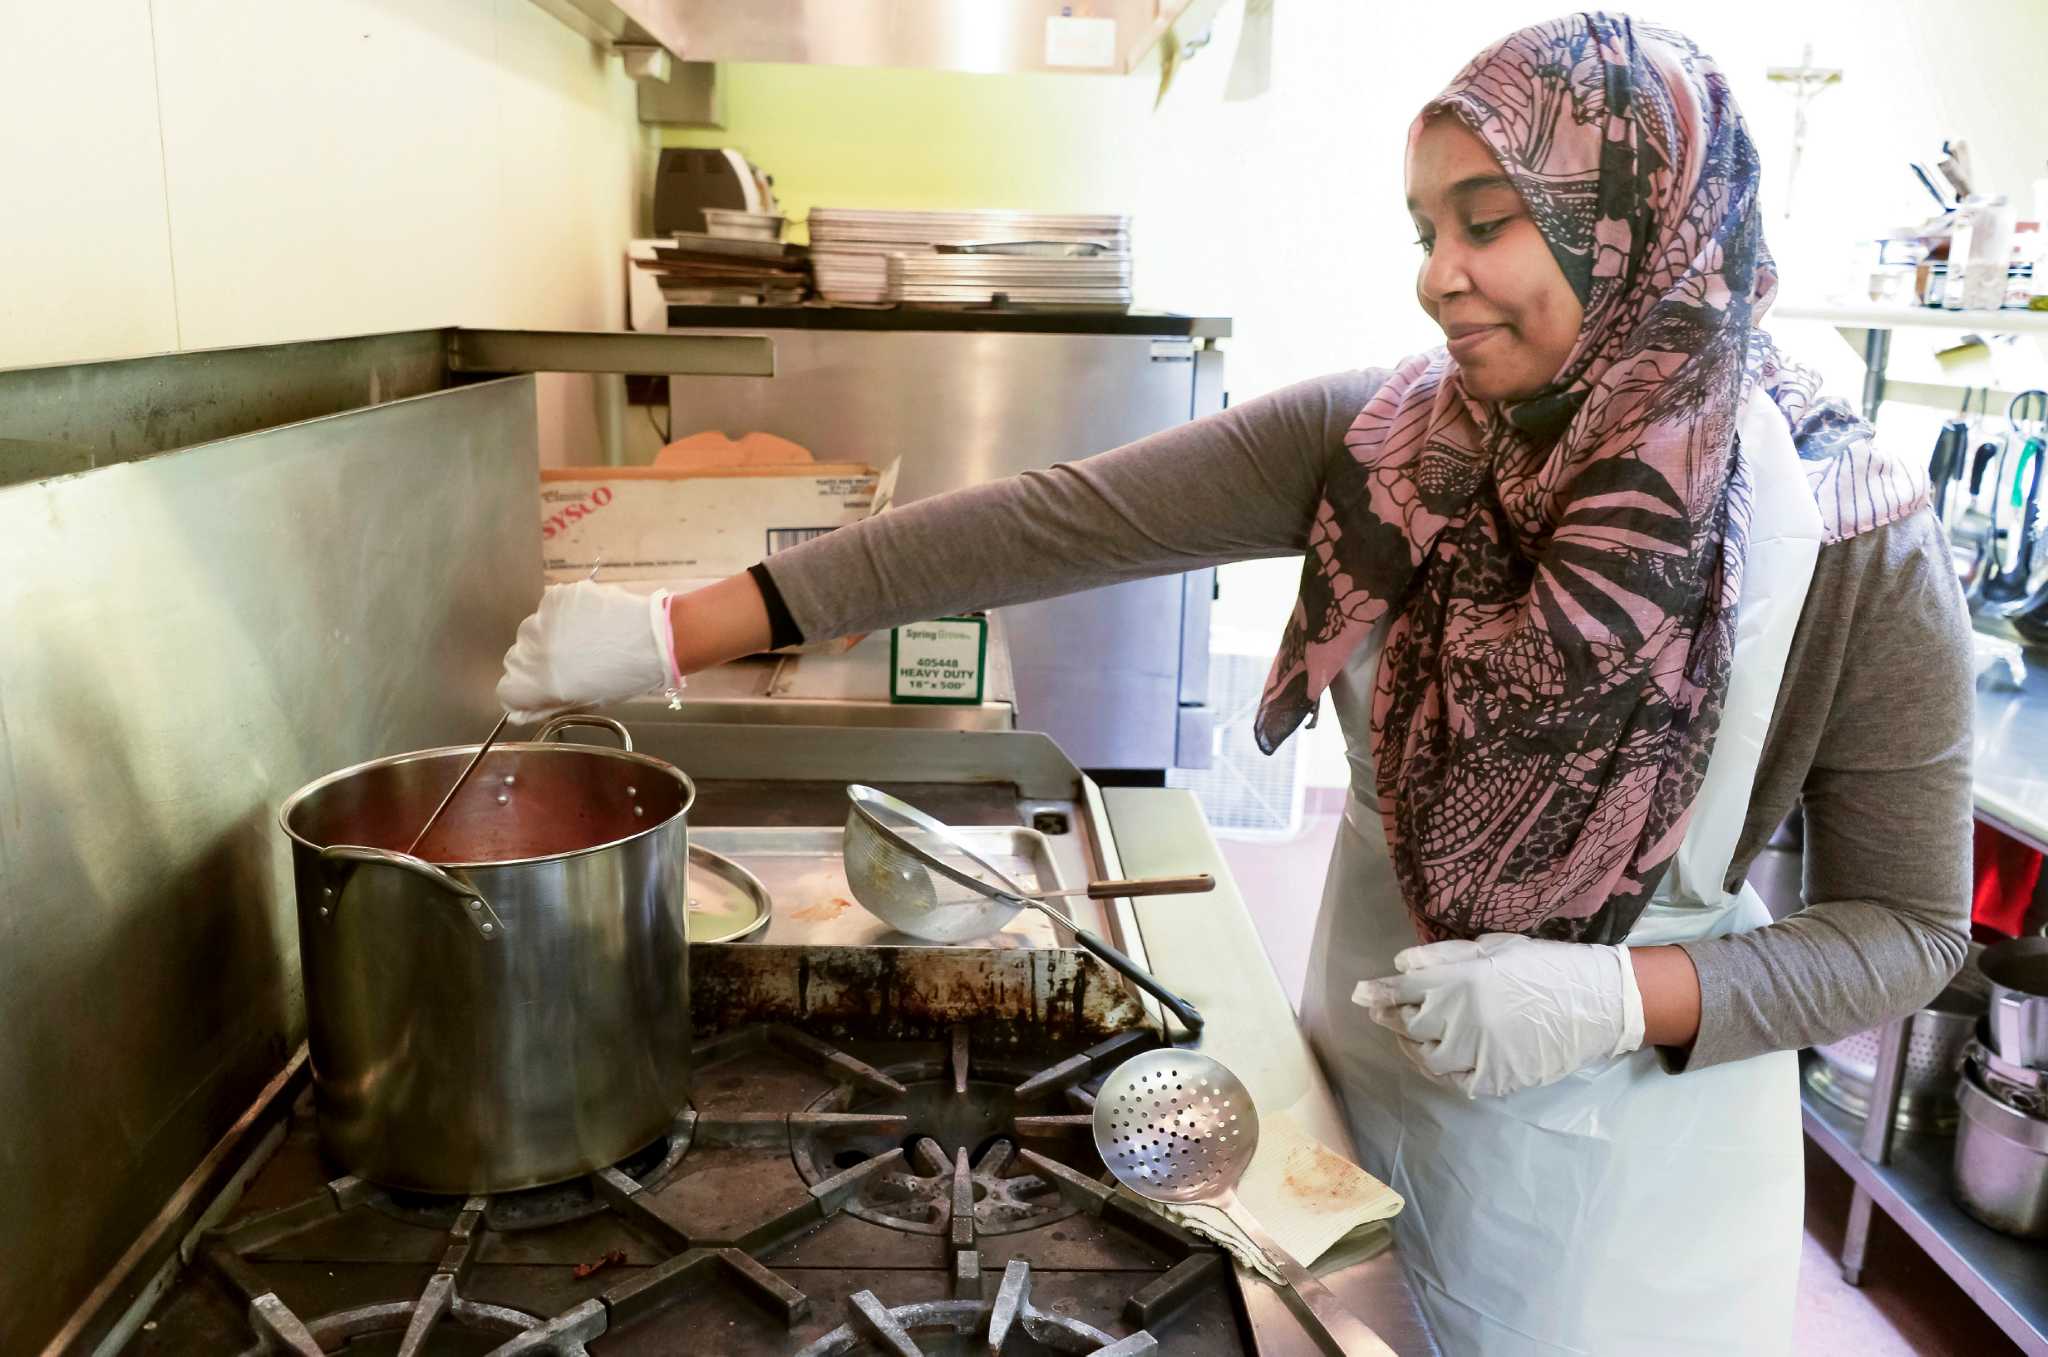 Muslim Soup Kitchen Project Aims To